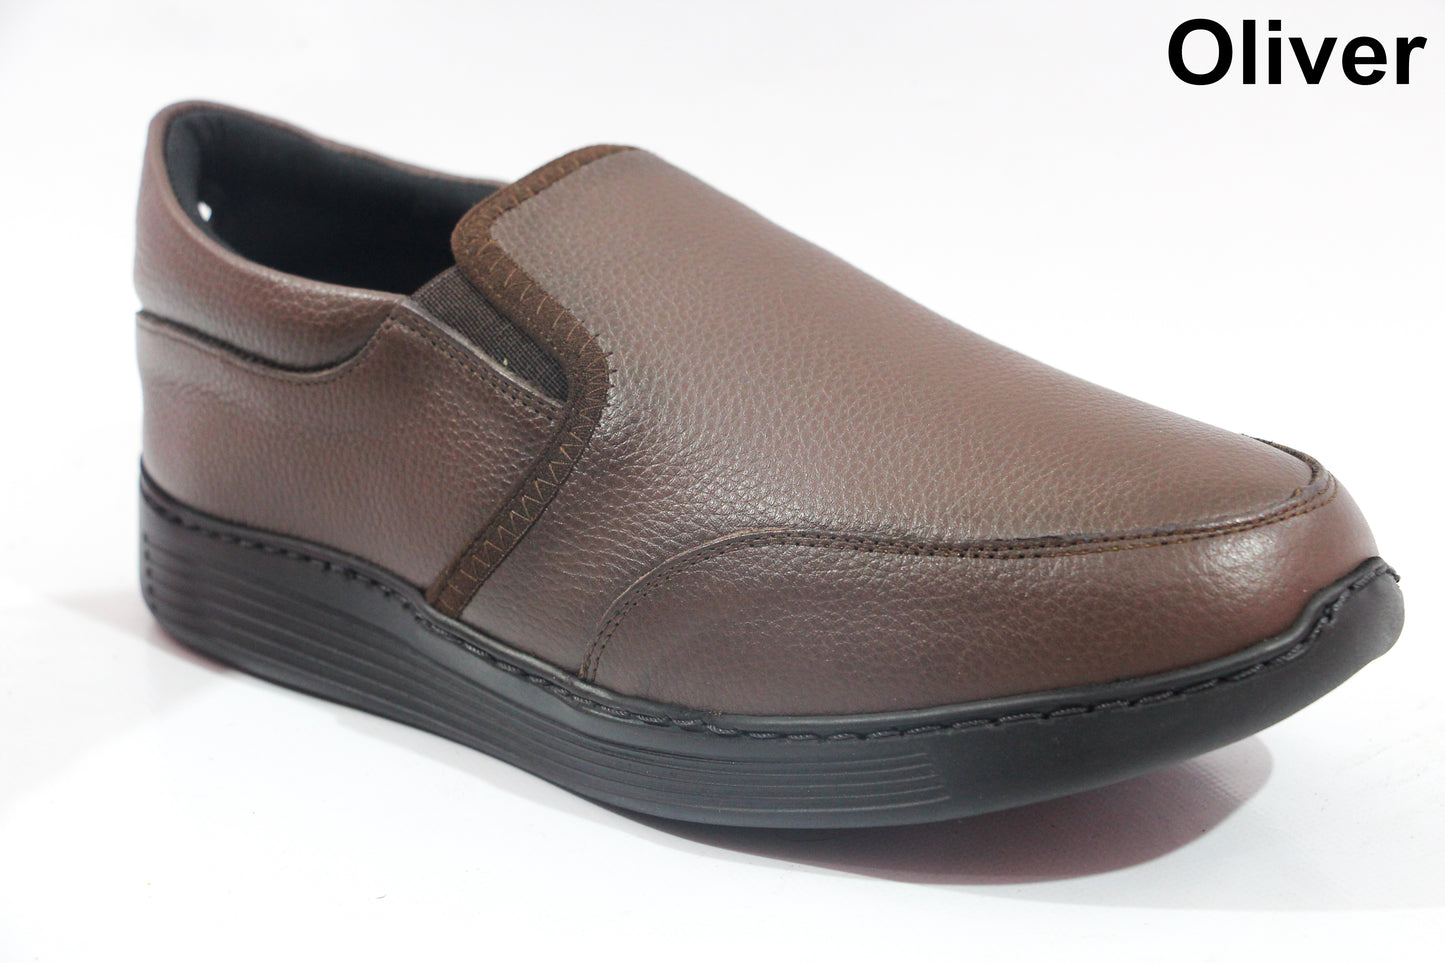 Chaussure Confortable 113/114 – OLIVER